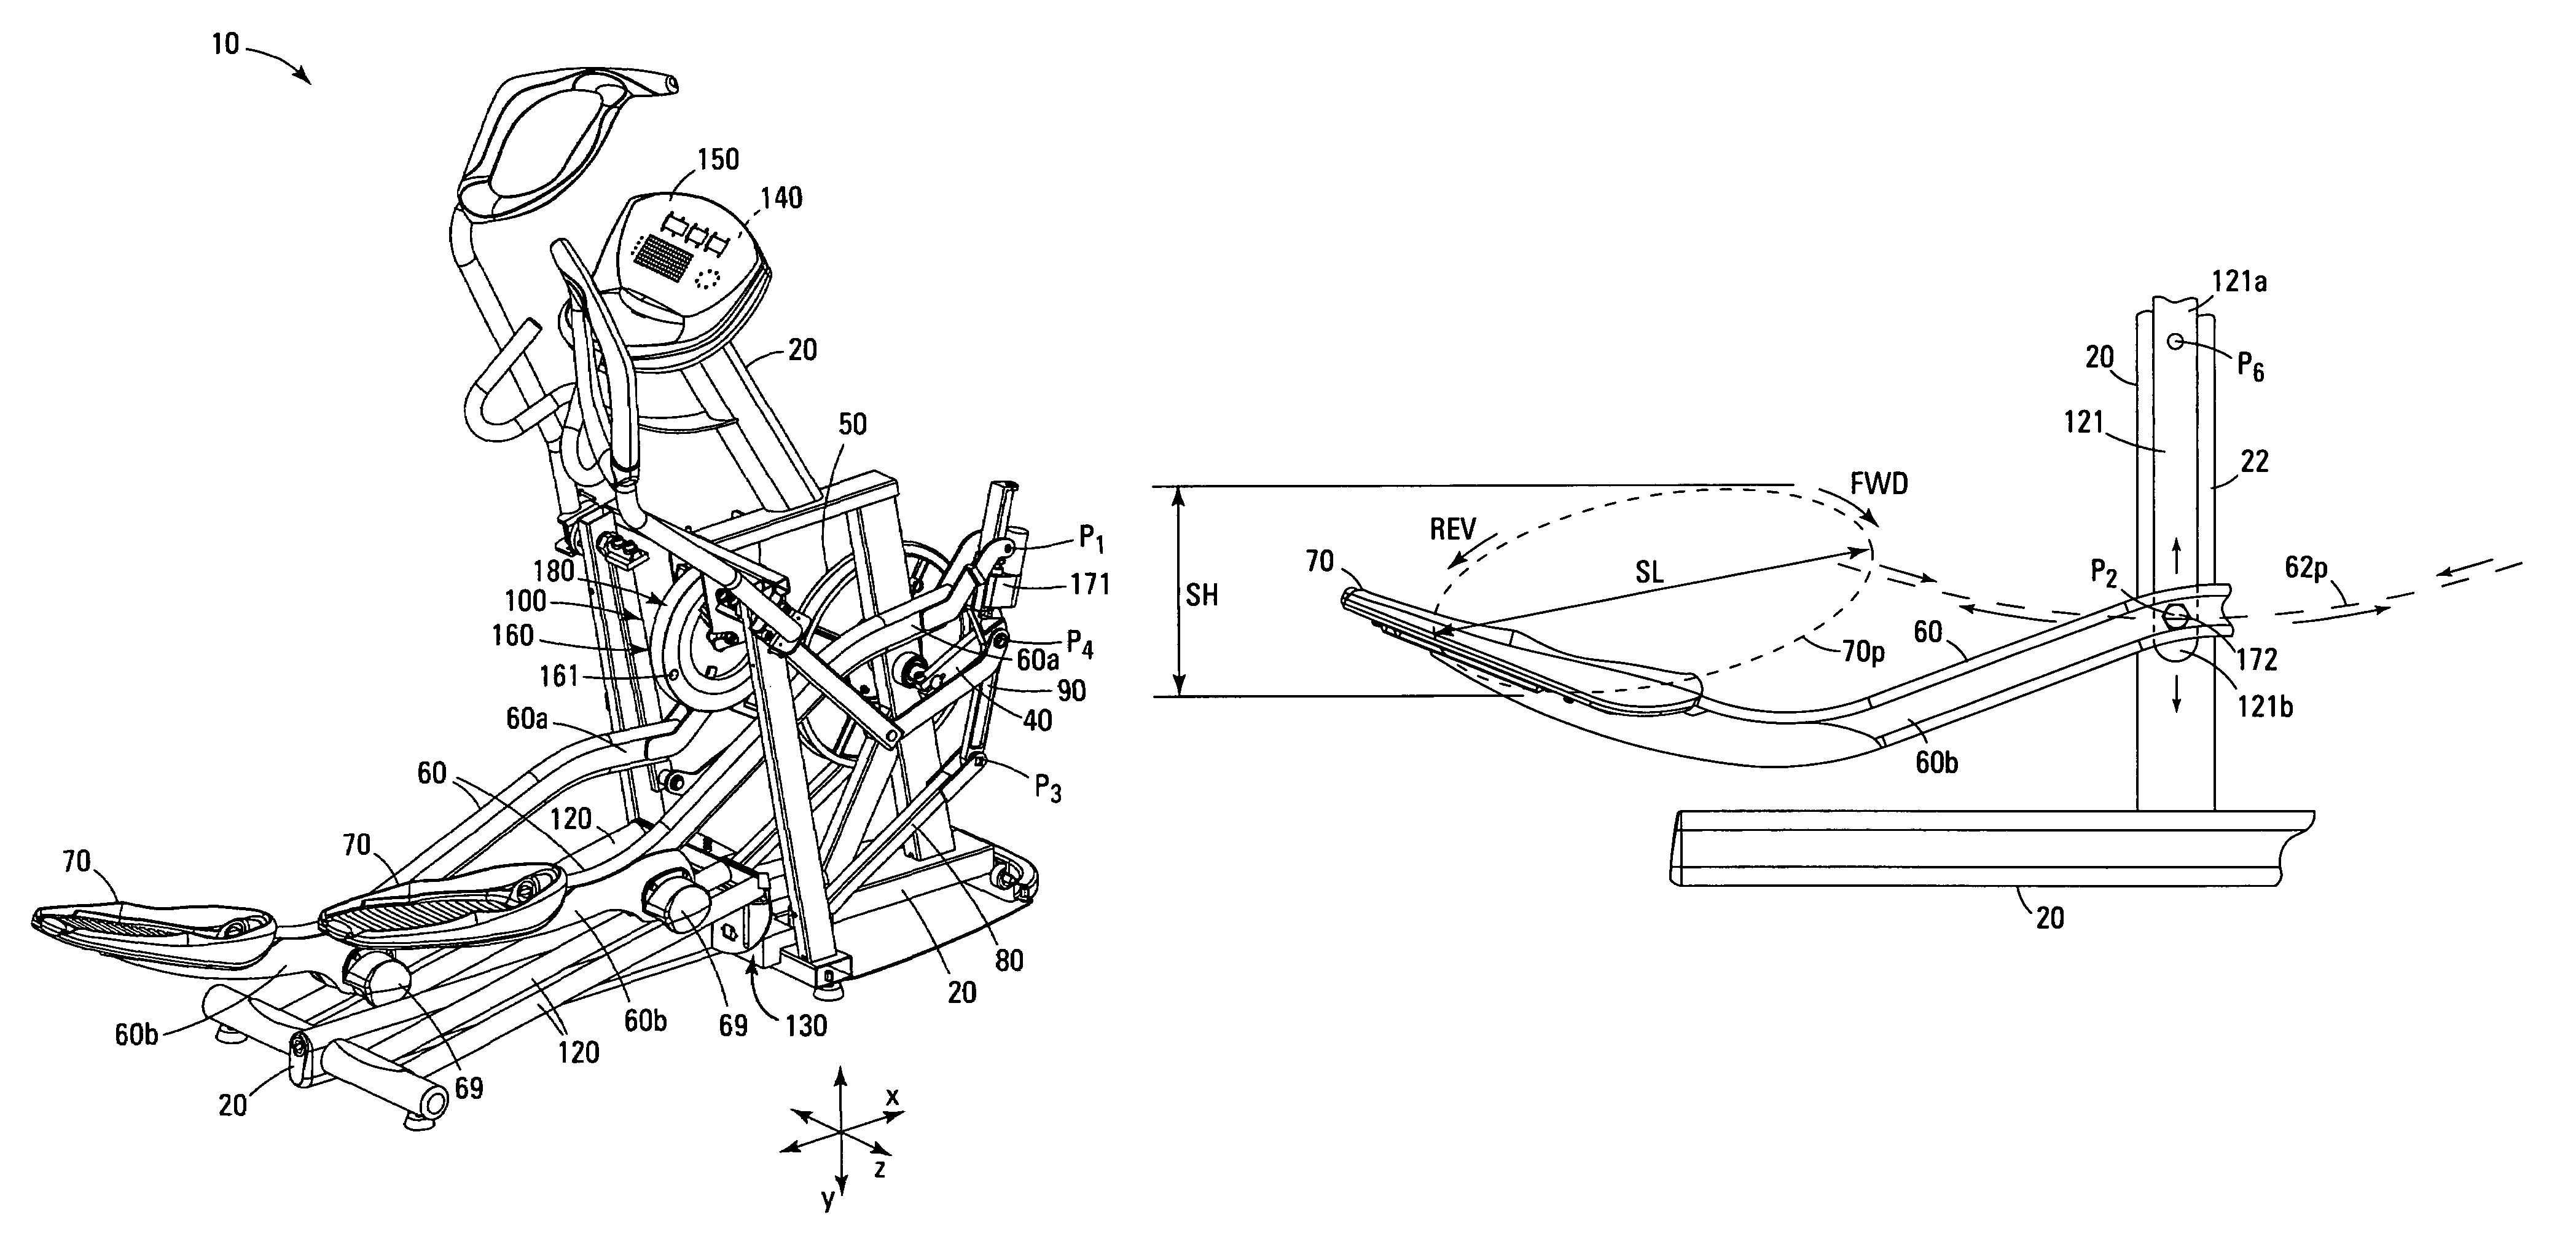 Exercise equipment with automatic adjustment of stride length and/or stride height based upon speed of foot support